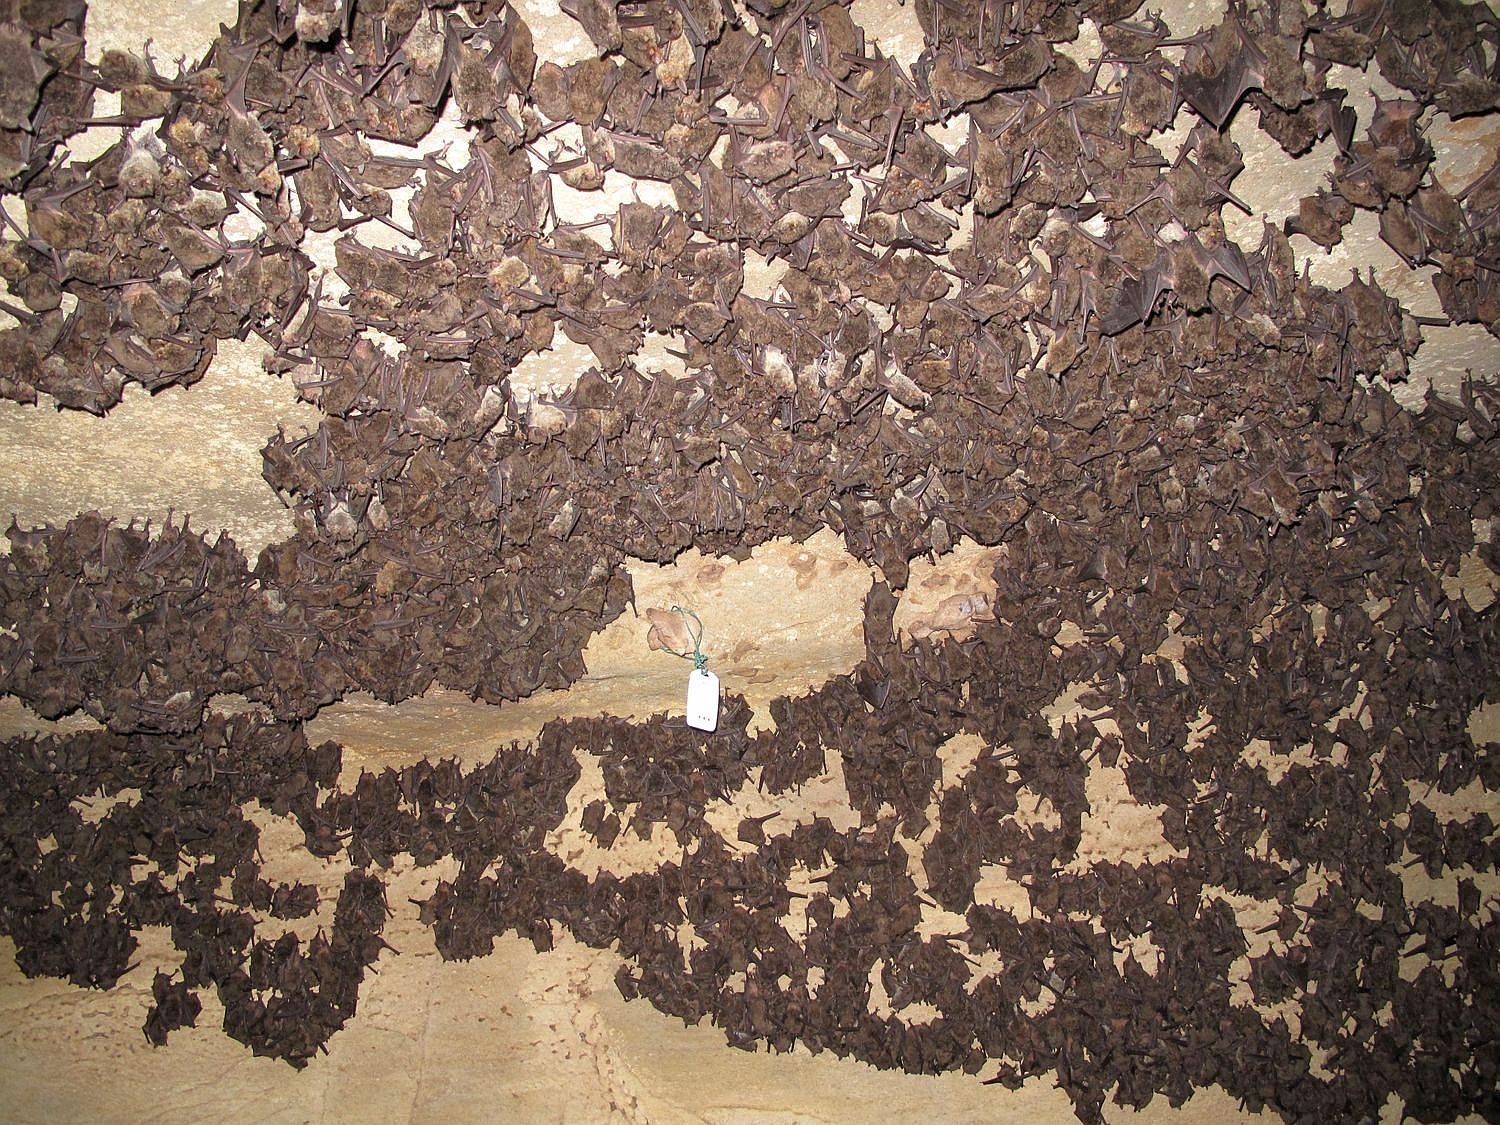 A hundred or more small brown-ish bats hanging upside down together in a cave